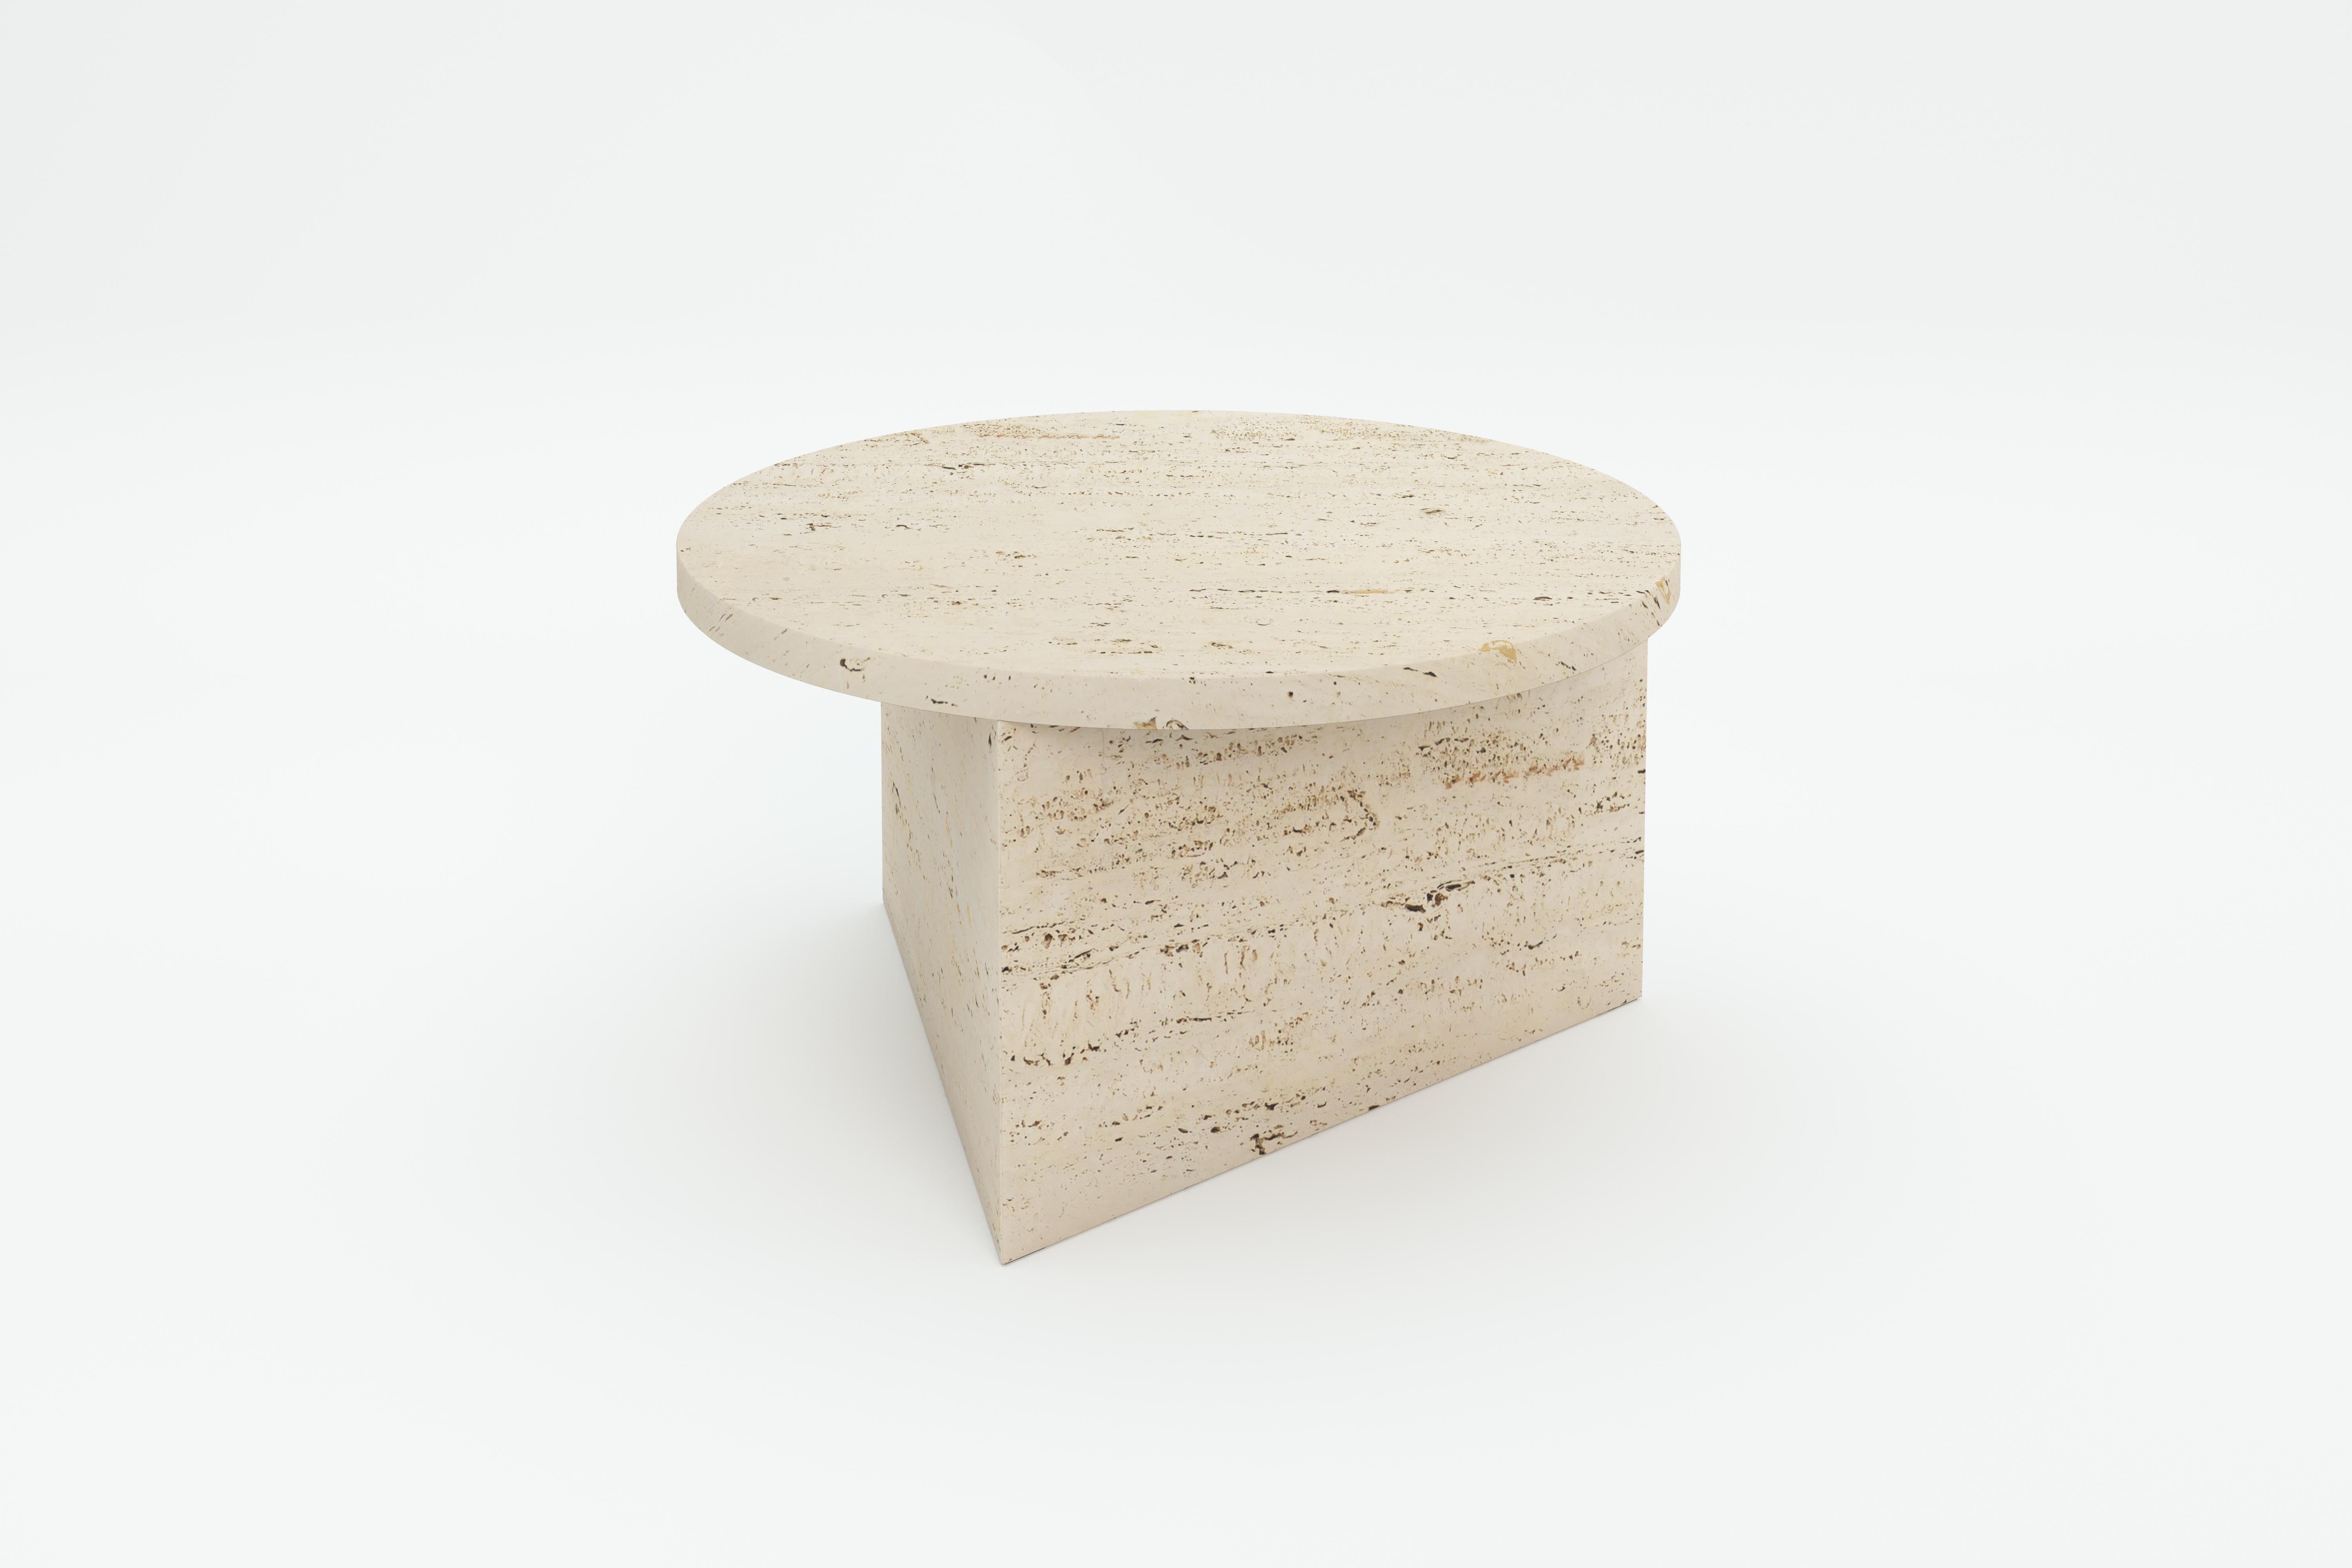 Travertine Prisma circle 70 coffe table by Sebastian Scherer
Dimensions: D 70 x H 35 cm
Materials: Travertine.
Weight: 48.4 kg.
Also available: Glass, steel, mirror. Different dimensions.


All joining edges precisely glued in mitre / all